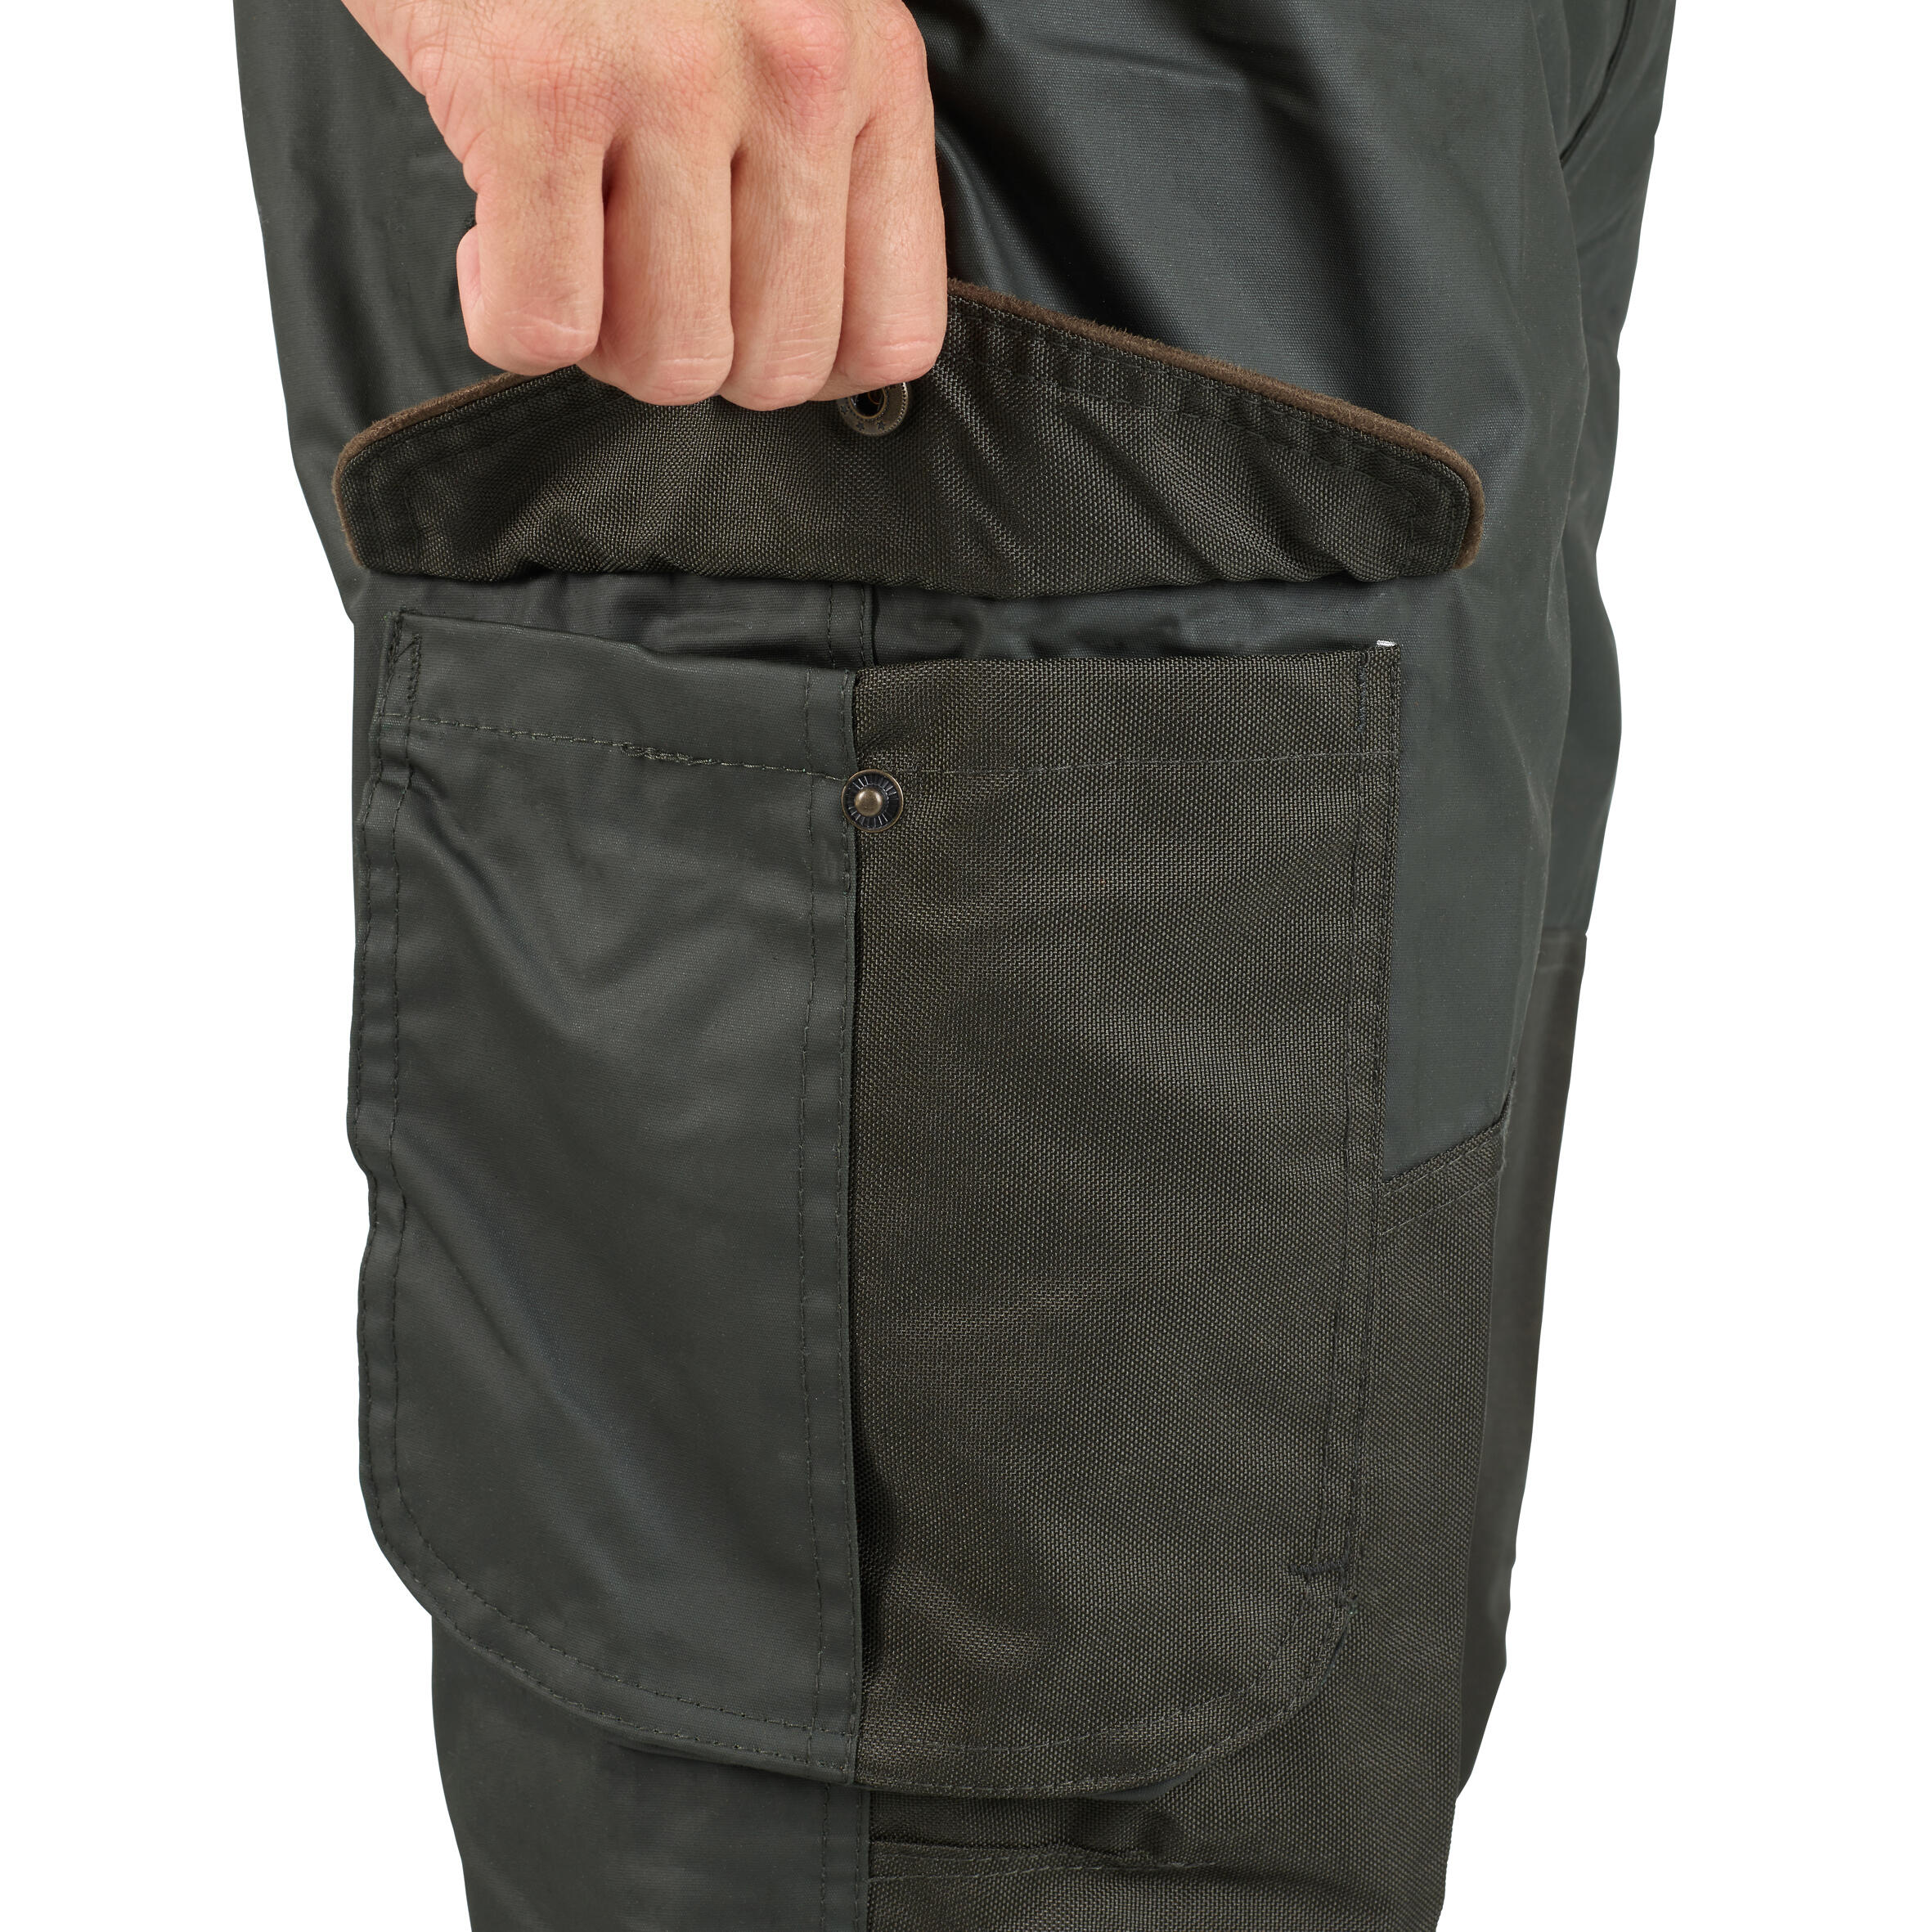 Impertane Tapered Country Sport Trousers - Green 13/14